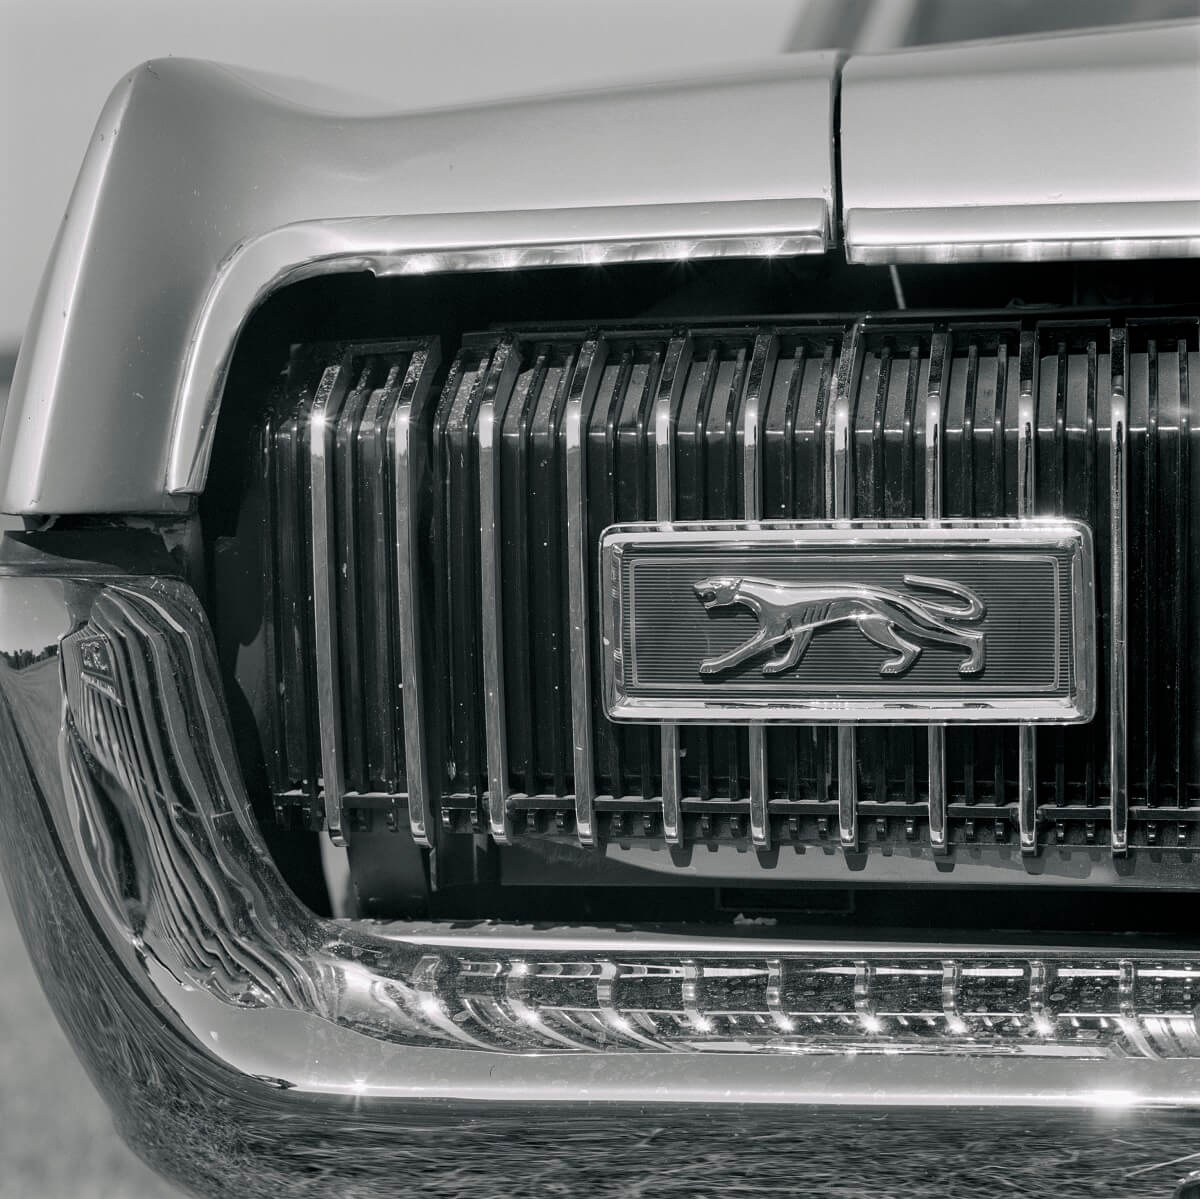 A 1967 Mercury Cougar XR-7 shows off its badge and hideaway headlight.